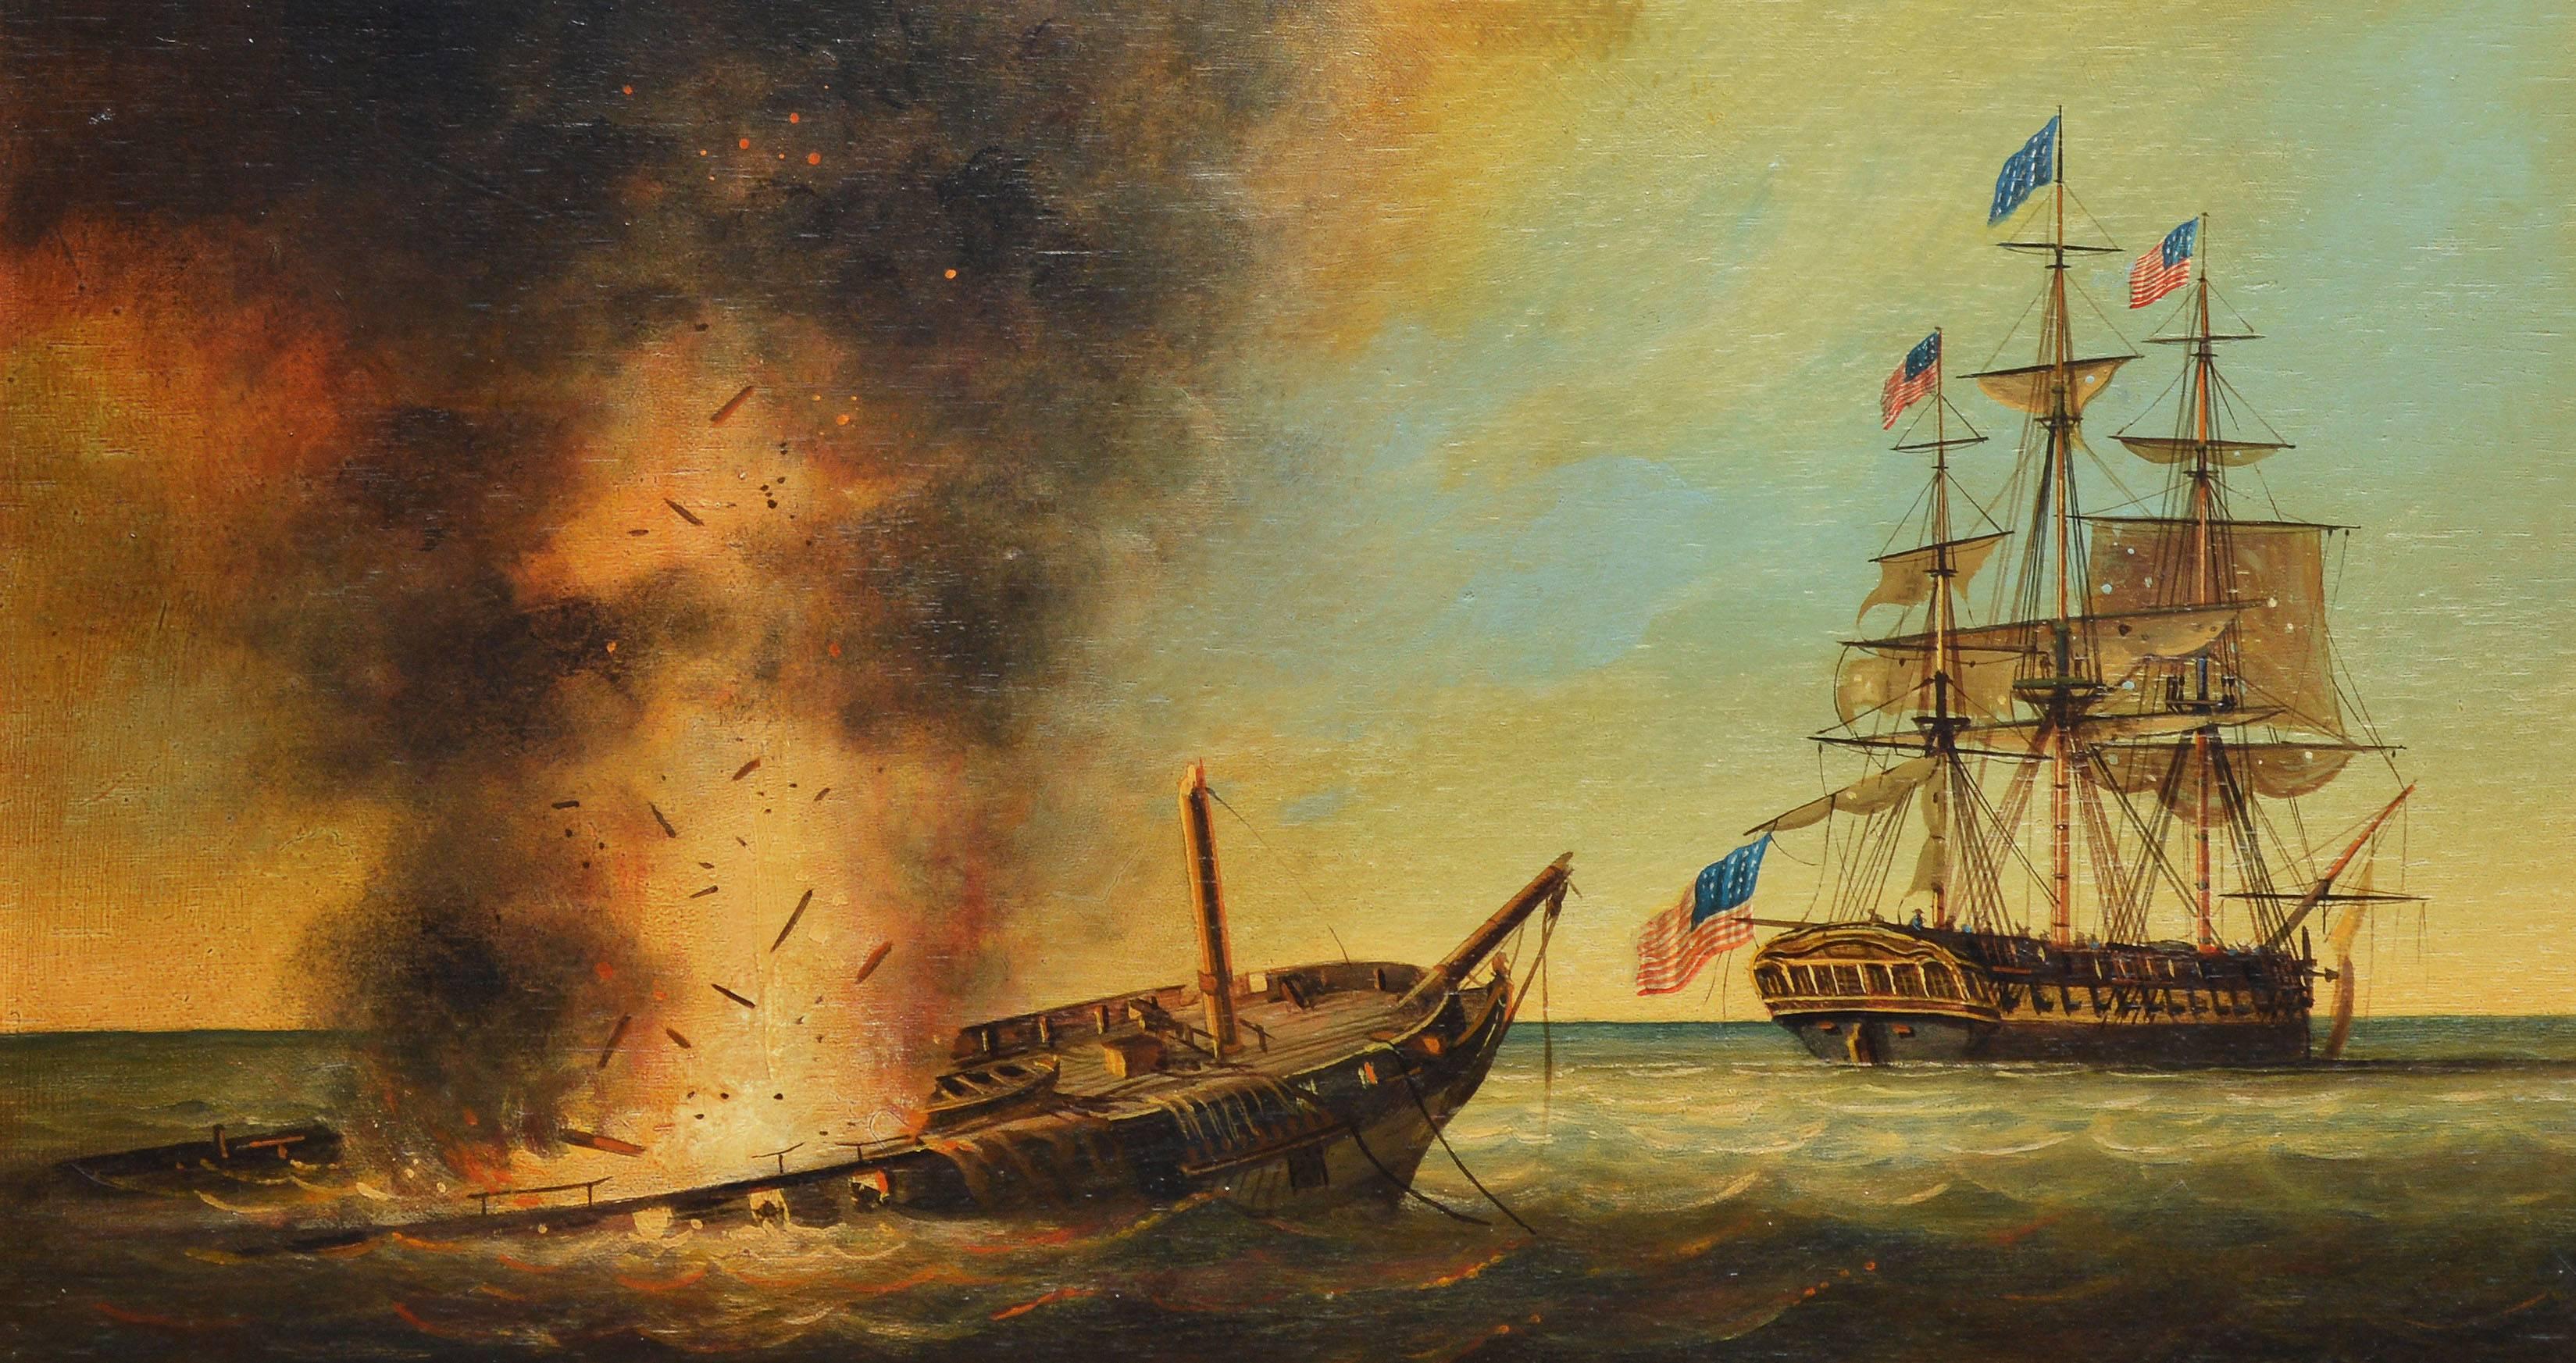 Realist painting of a naval battle between The Constitution and Java by Brian Coole.  Oil on board, circa 1970.  Signed lower right, "Brian Coole".  Displayed in a giltwood frame. Image size, 25"L x 15"H, overall 31"L x